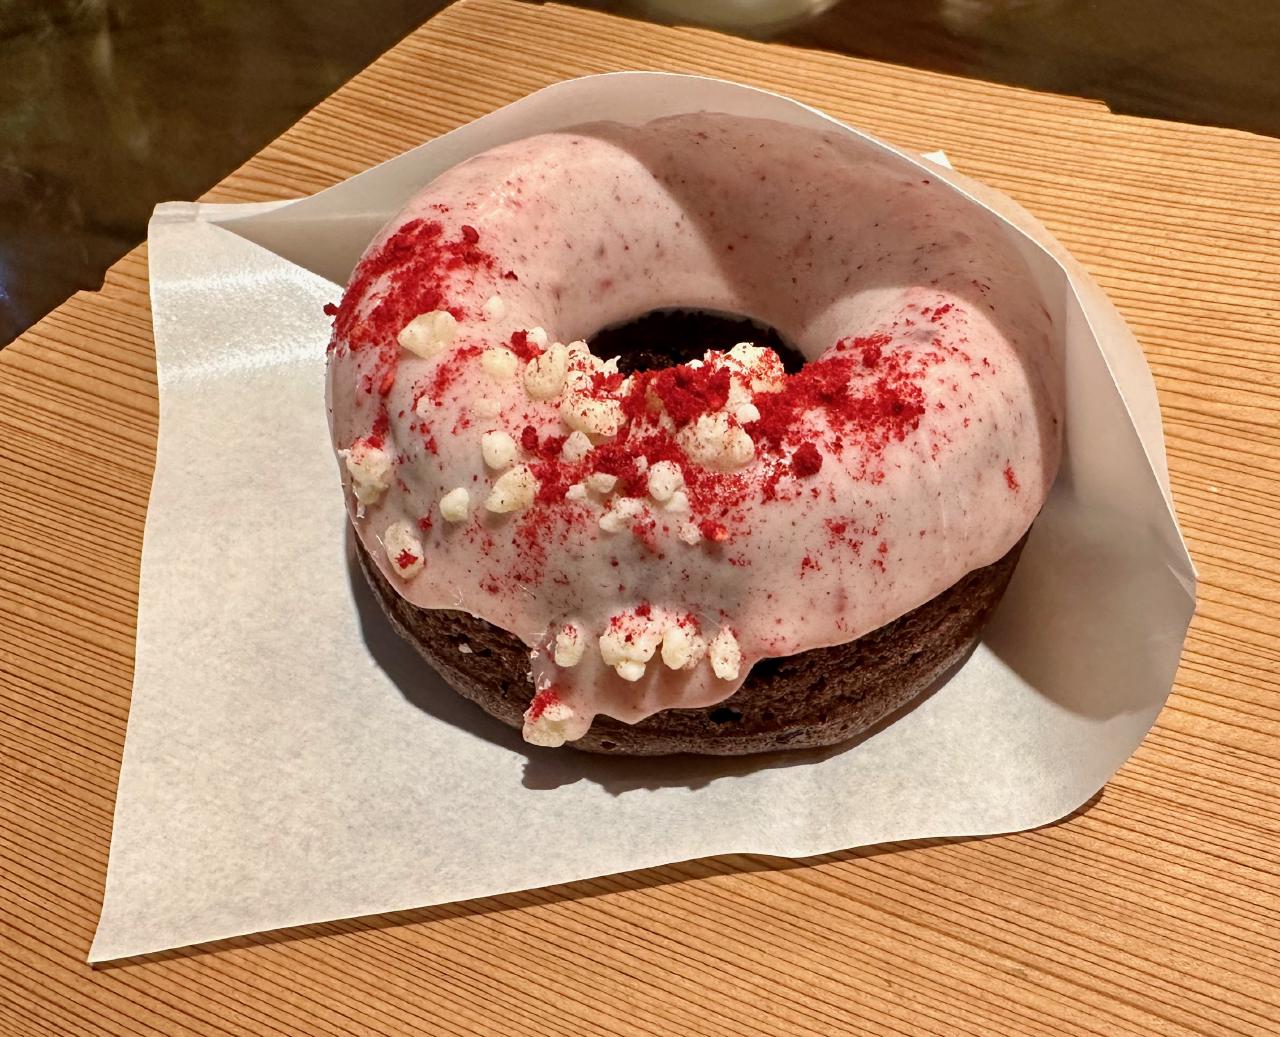 A chocolate and raspberry donut at Hocus Pocus